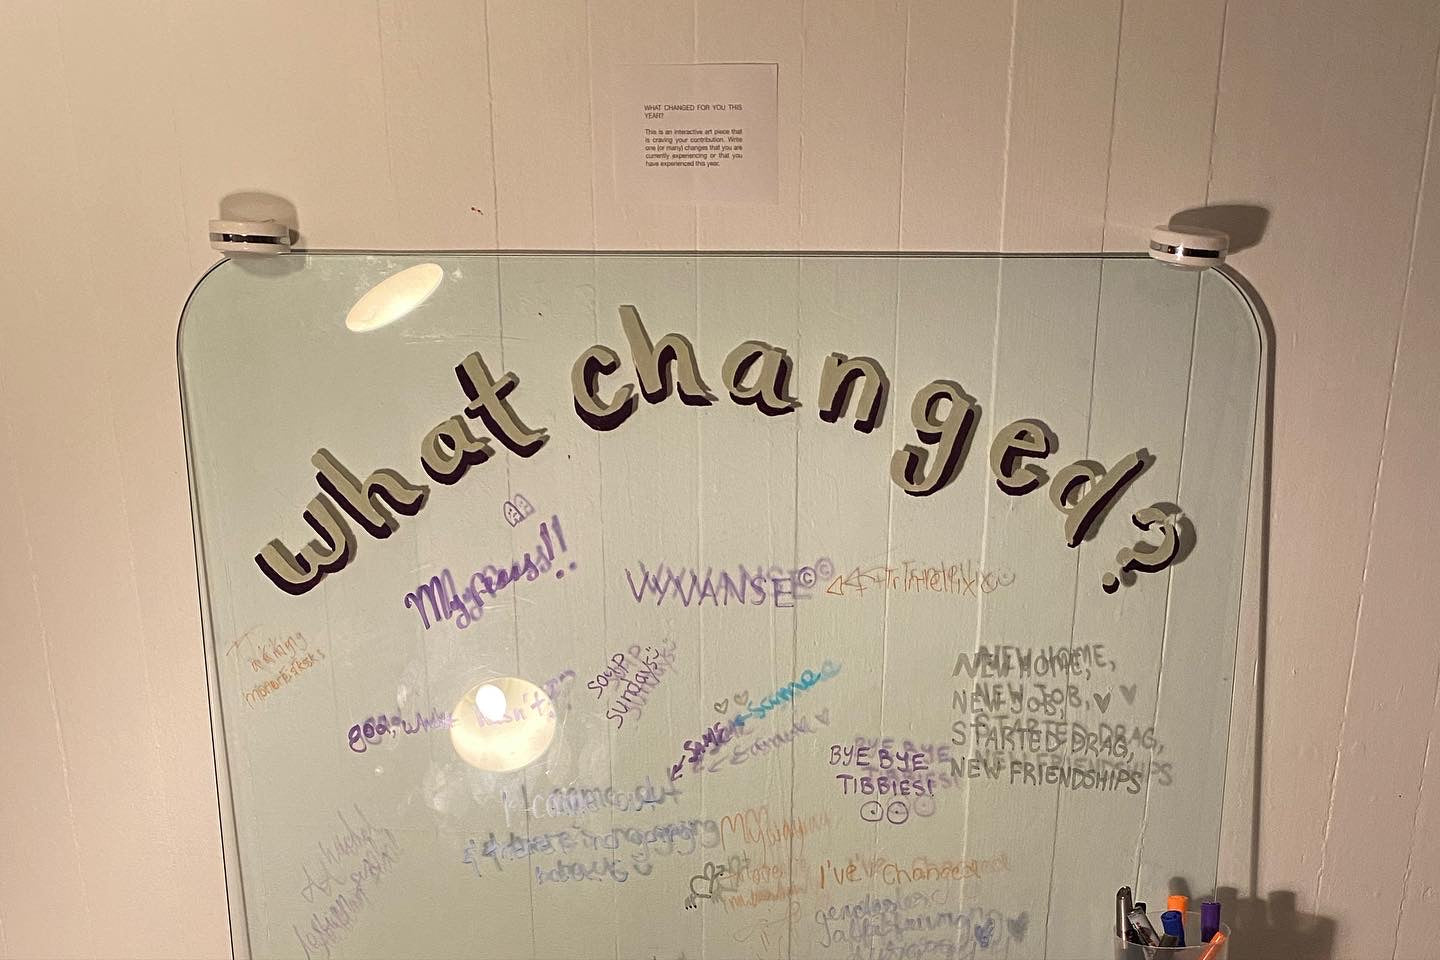 The interactive art piece at the event is a large glass surface leaning against a wall, with the words "What changed?" painted on. Guests have used markers to write down things that changed for them in the past year and have filled up the glass surface.